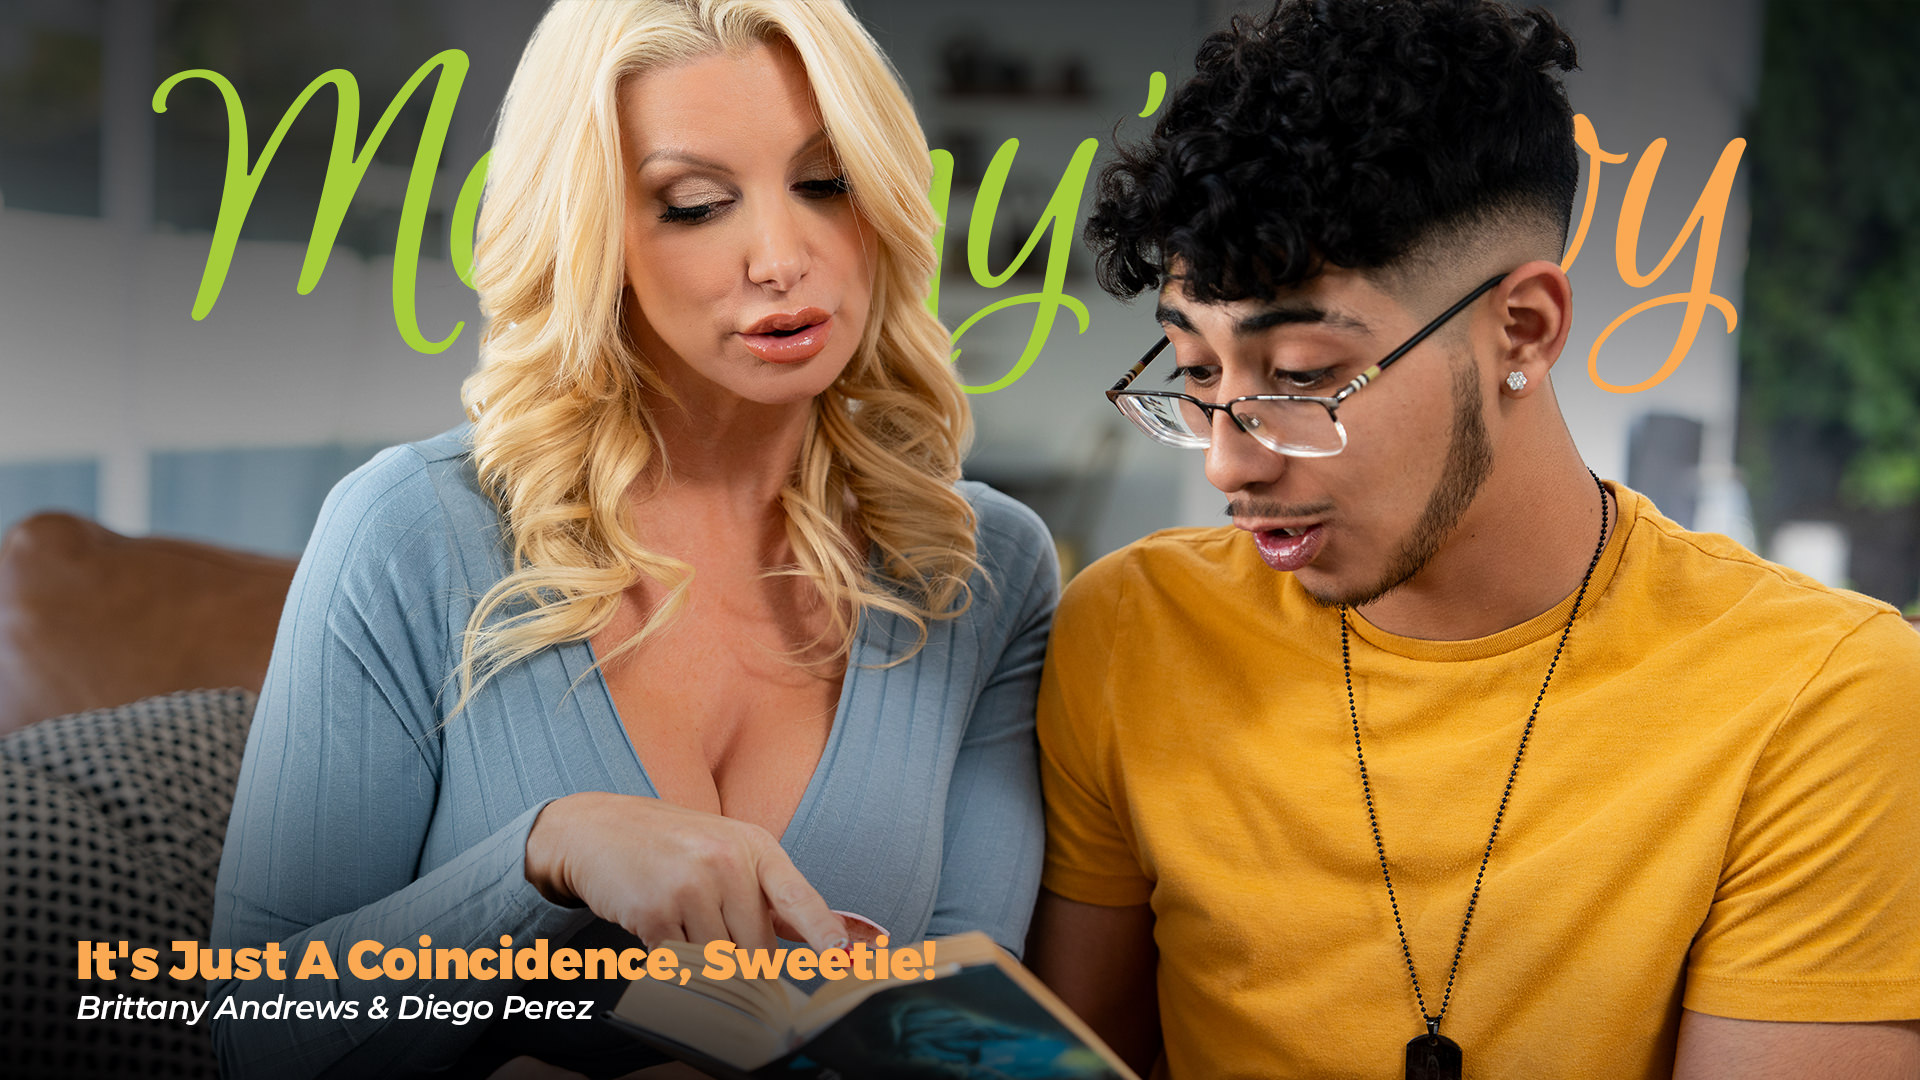 Brittany Andrews, Diego Perez “It’s Just A Coincidence, Sweetie!” MommysBoy